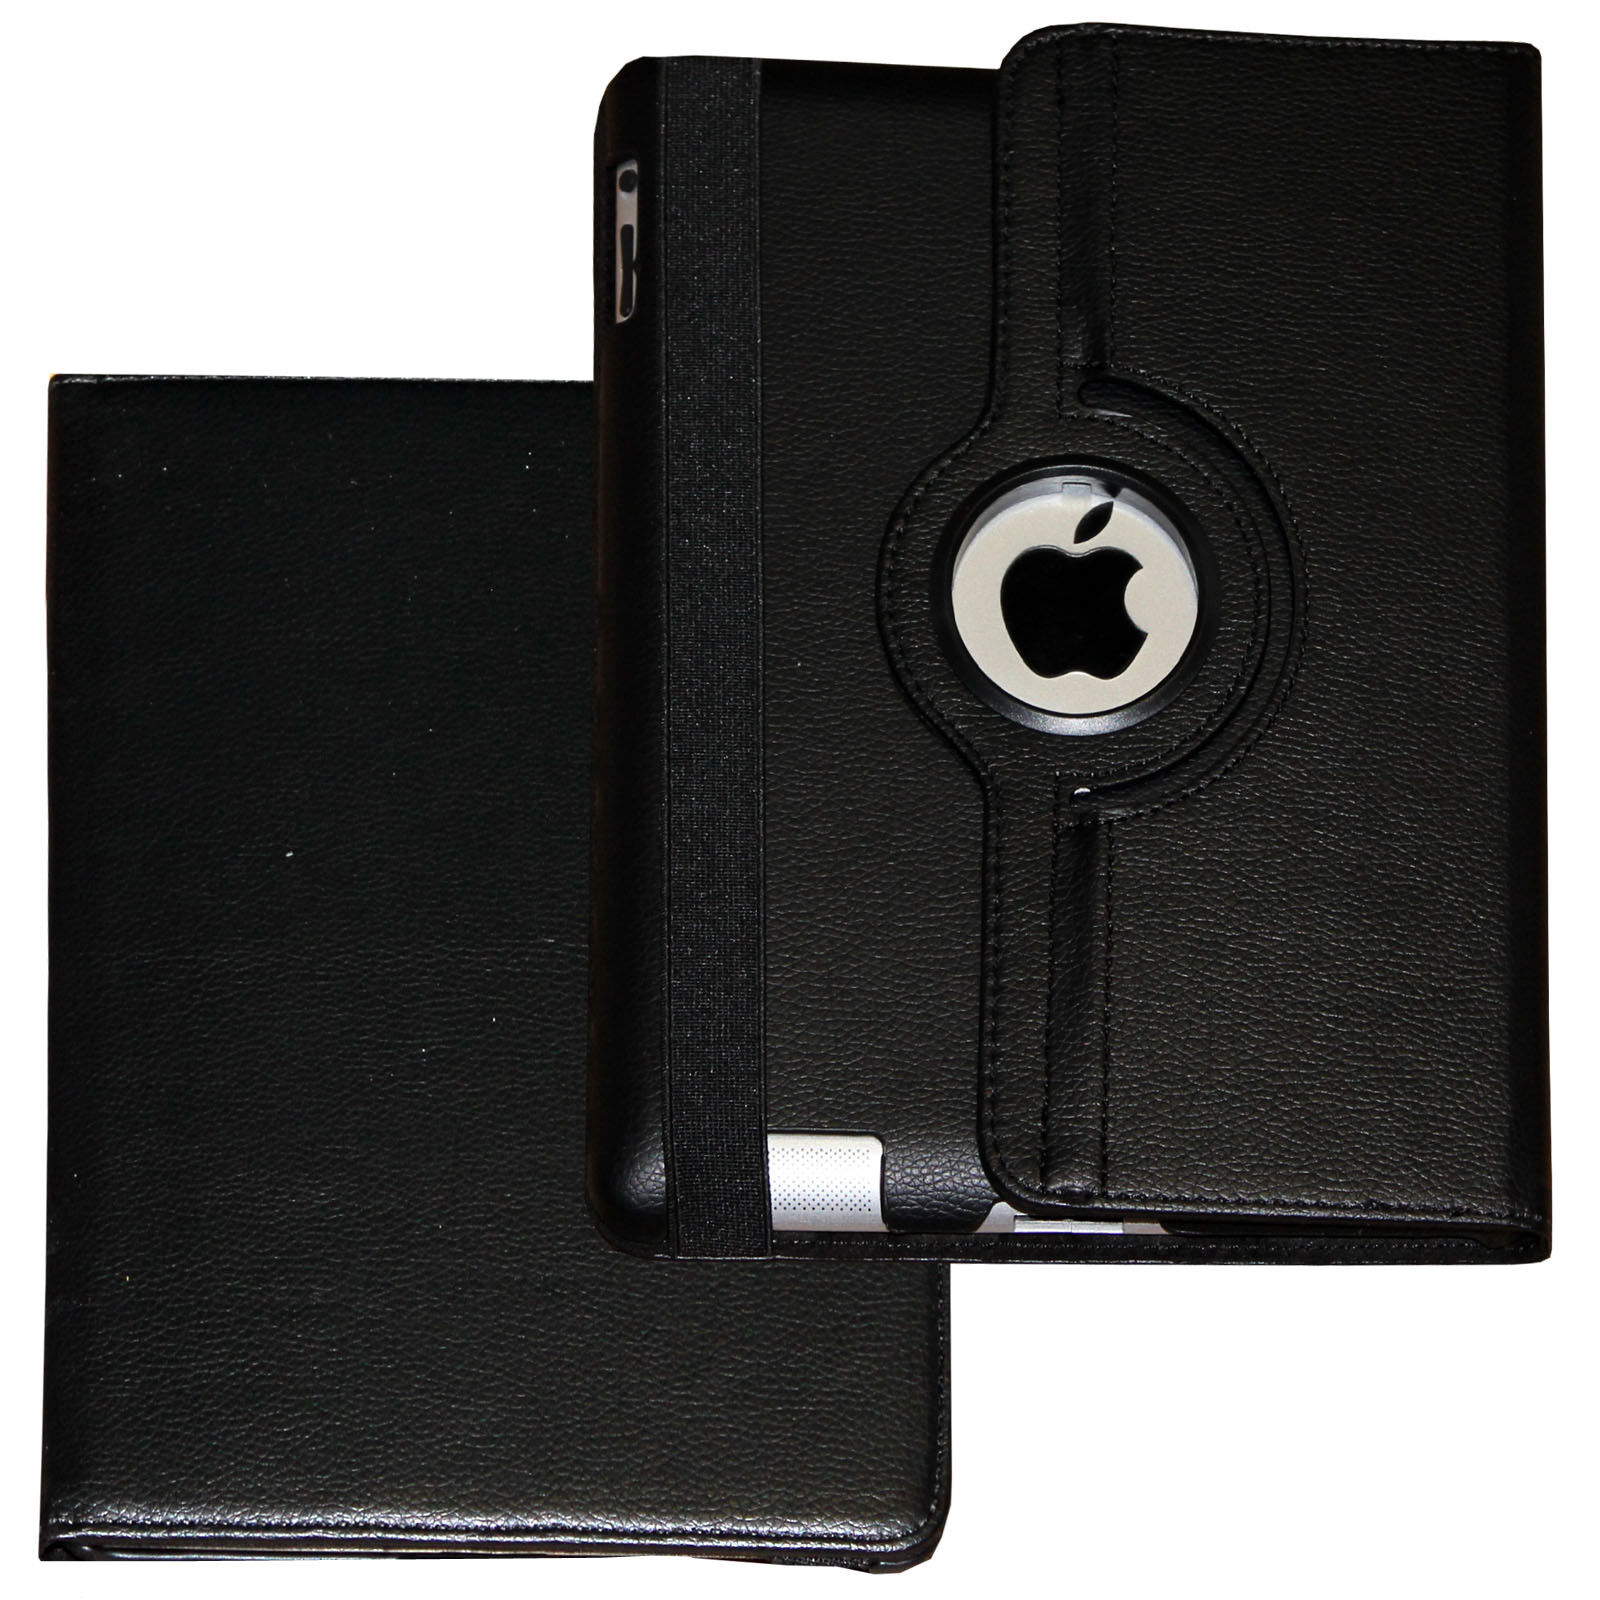 360 Rotating Magnetic Leather Case Smart Cover Stand For iPad 6th 5th Generation